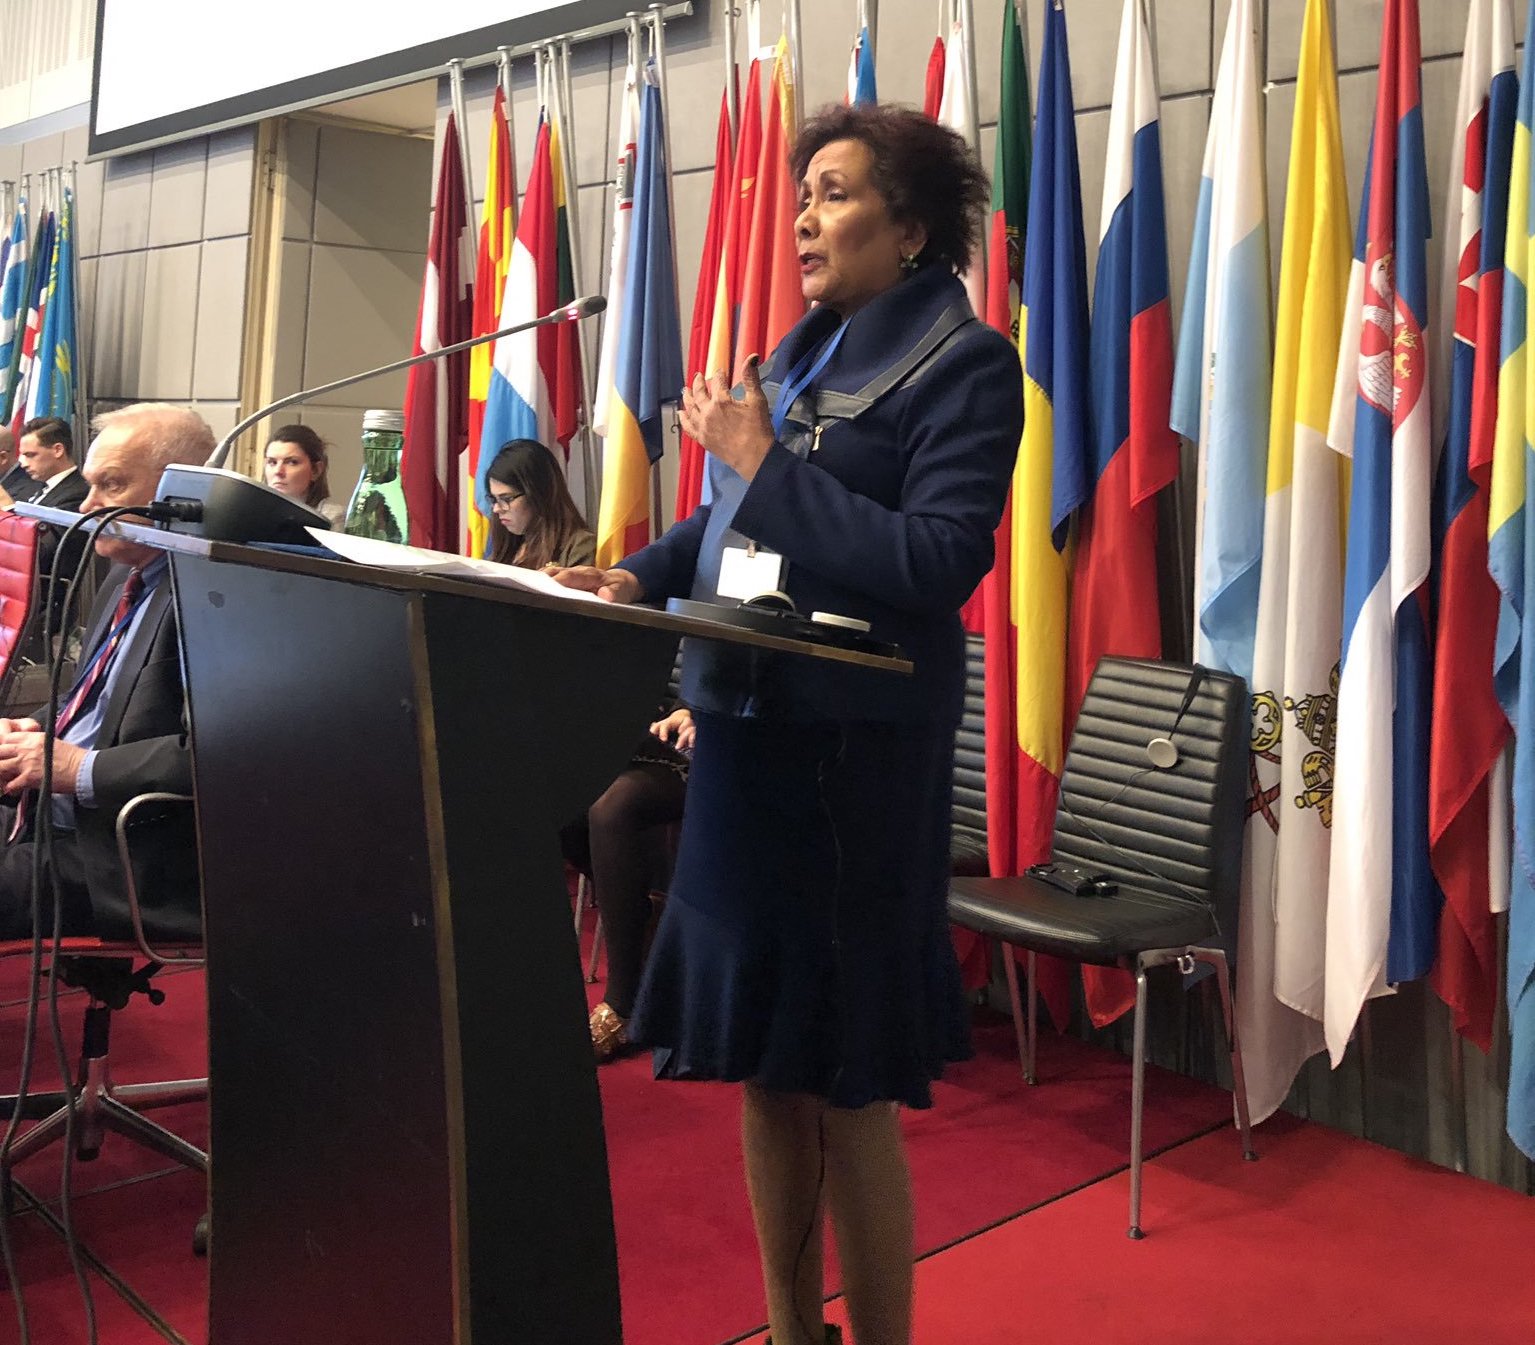 Delivering Remarks at OSCE Luxembourg 2019 – Gender Report